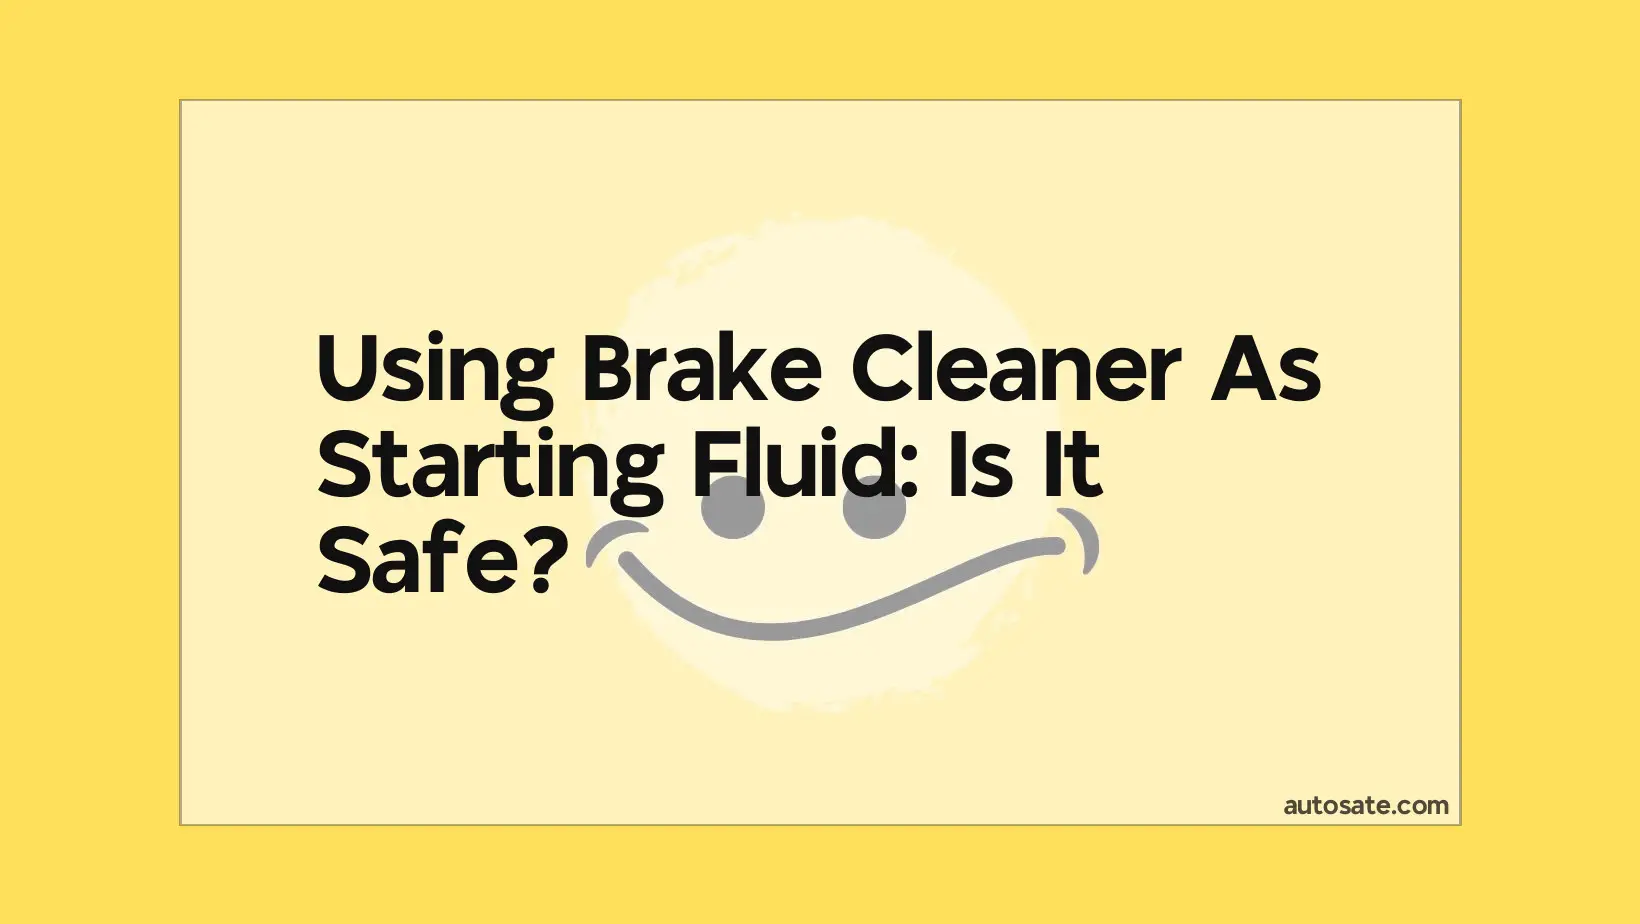 Using Brake Cleaner As Starting Fluid: Is It Safe?